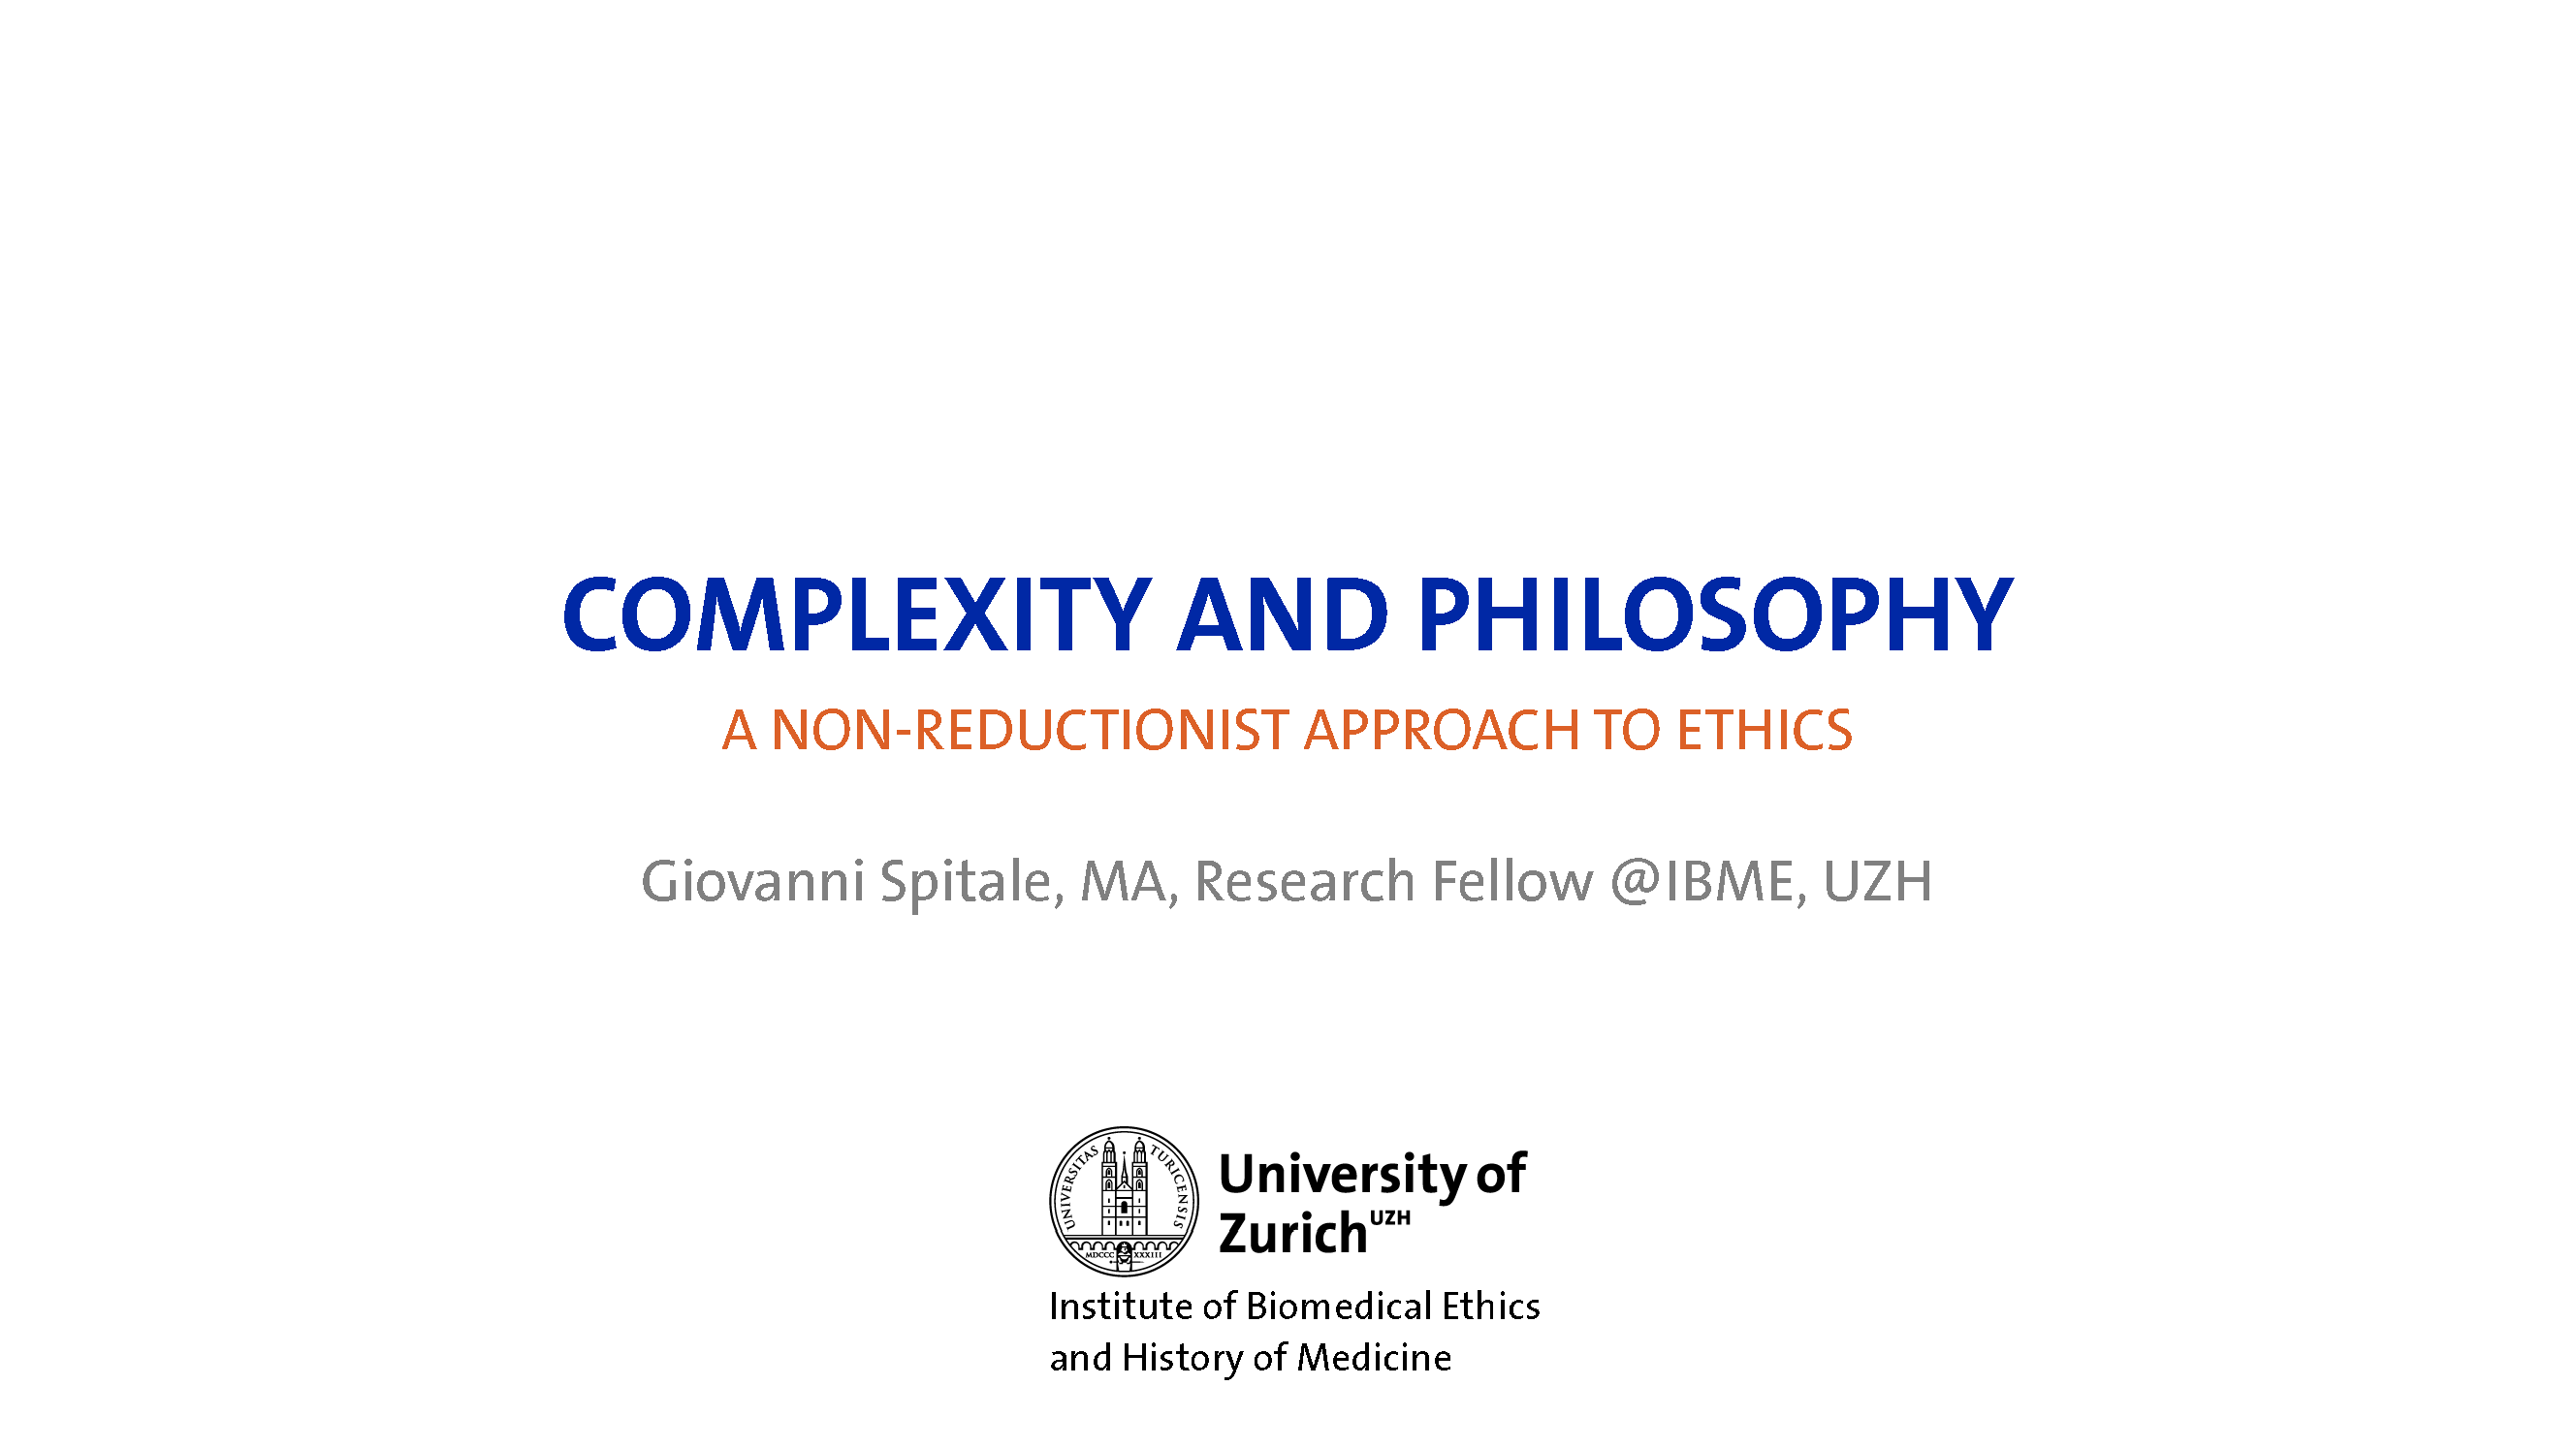 Complexity and philosophy@IBME